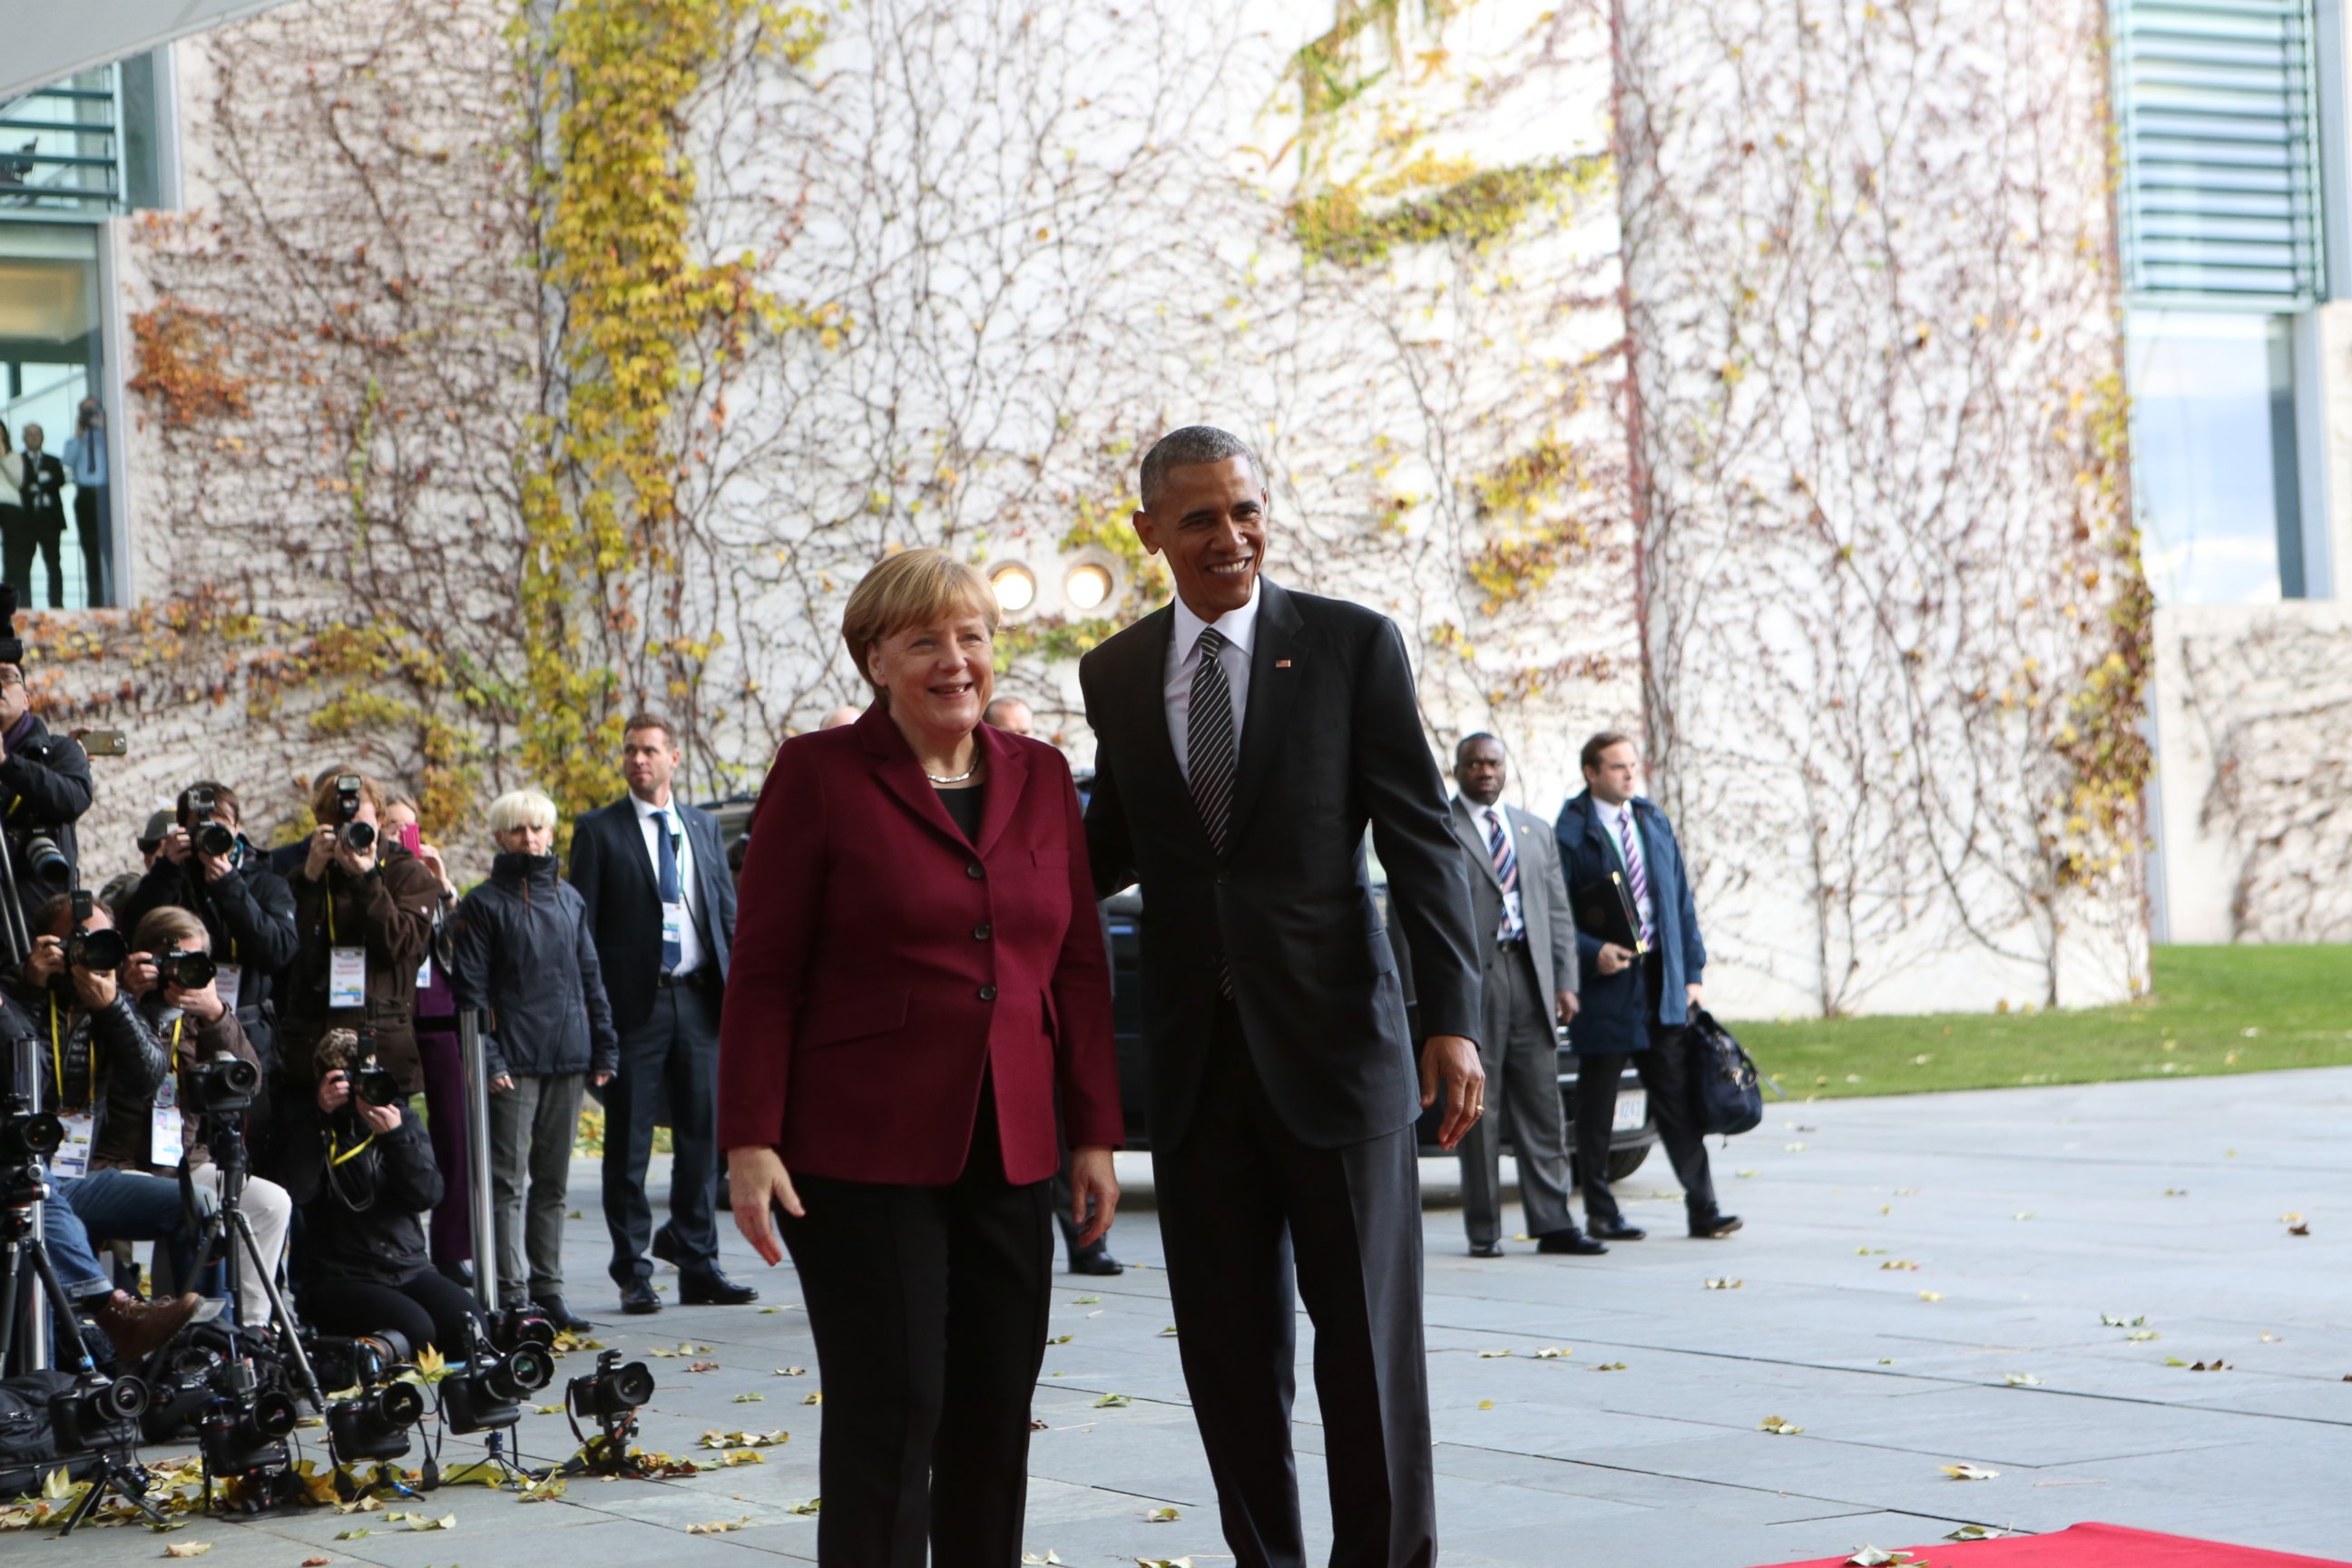 PHOTO: American President Barack Obama and Federal Chancellor Angela Merkel on the red carpet in front of the Federal Chancellery, Berlin, Germany, Nov. 11, 2016.  